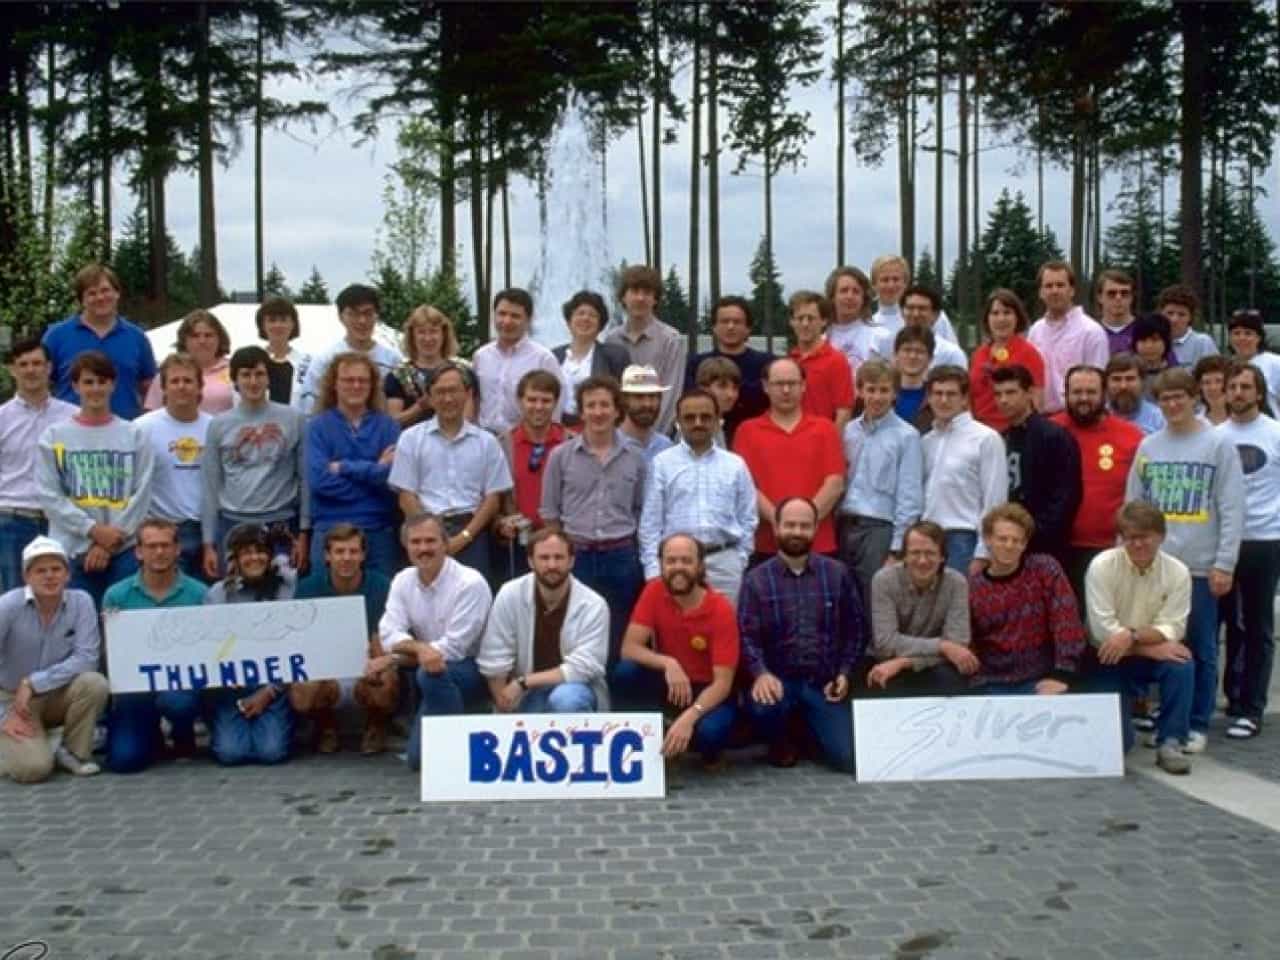 An photograph of the Microsoft Business Language Group members at a team event. Some people are holding signs that read 'Thunder', 'BASIC', and 'Silver'.